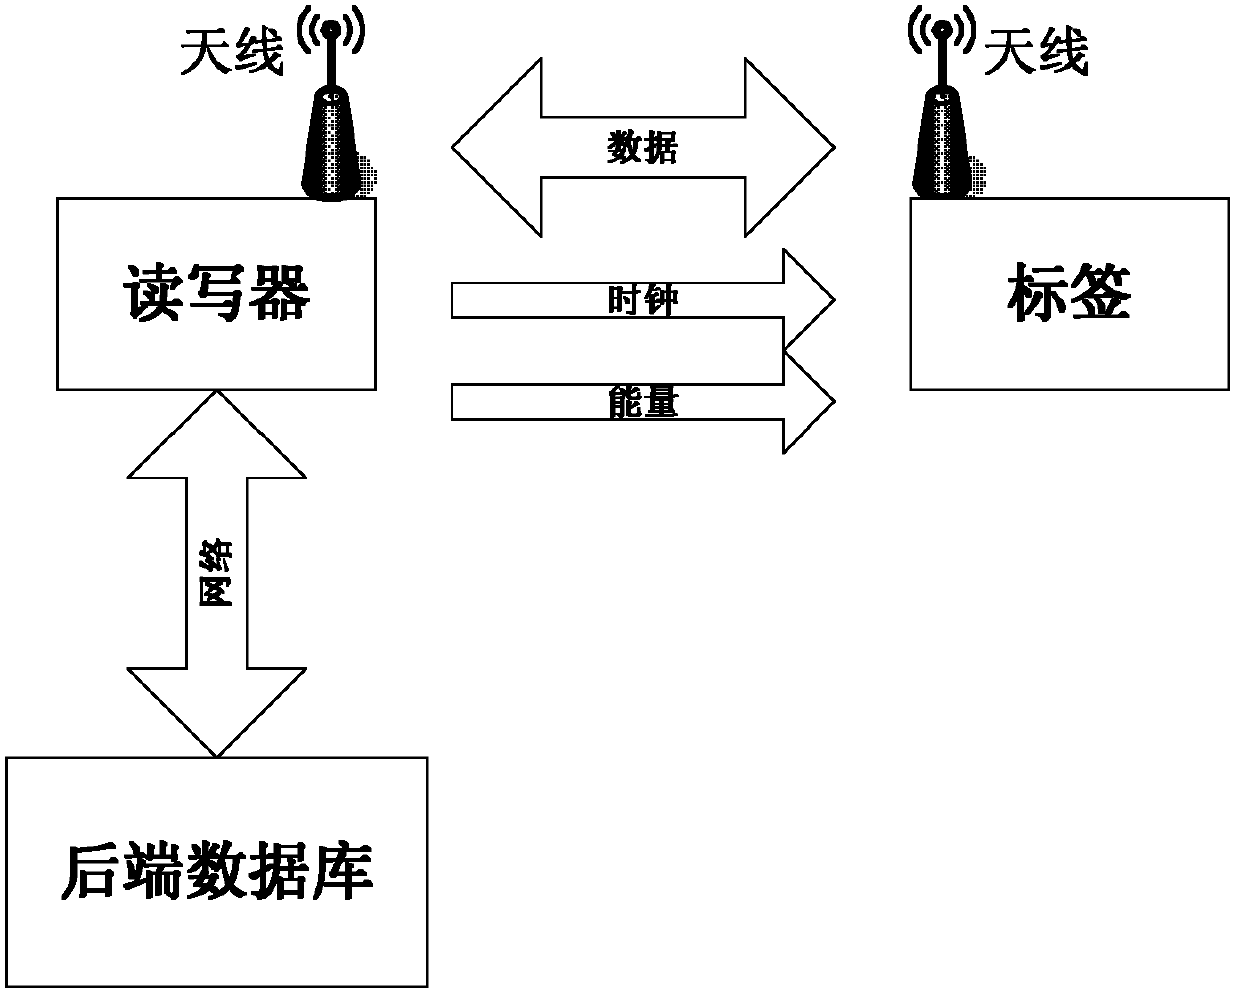 RFID (Radio Frequency Identification Device) mutual authentication method based on secret key and cache mechanism